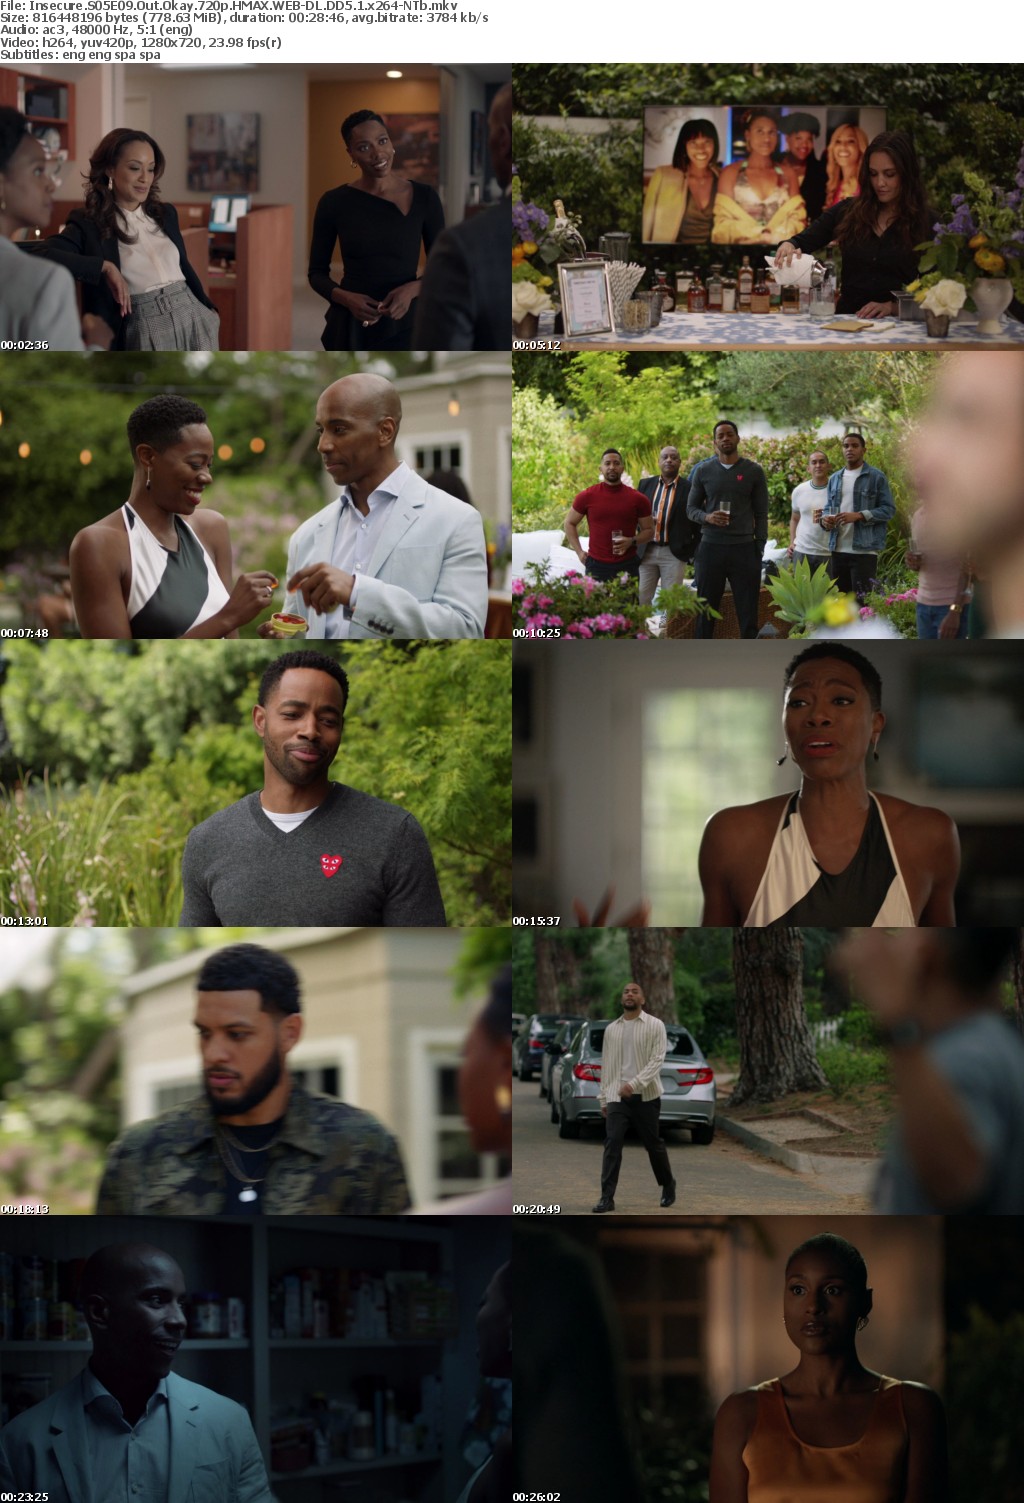 Insecure S05E09 Out Okay 720p HMAX WEBRip DD5 1 x264-NTb